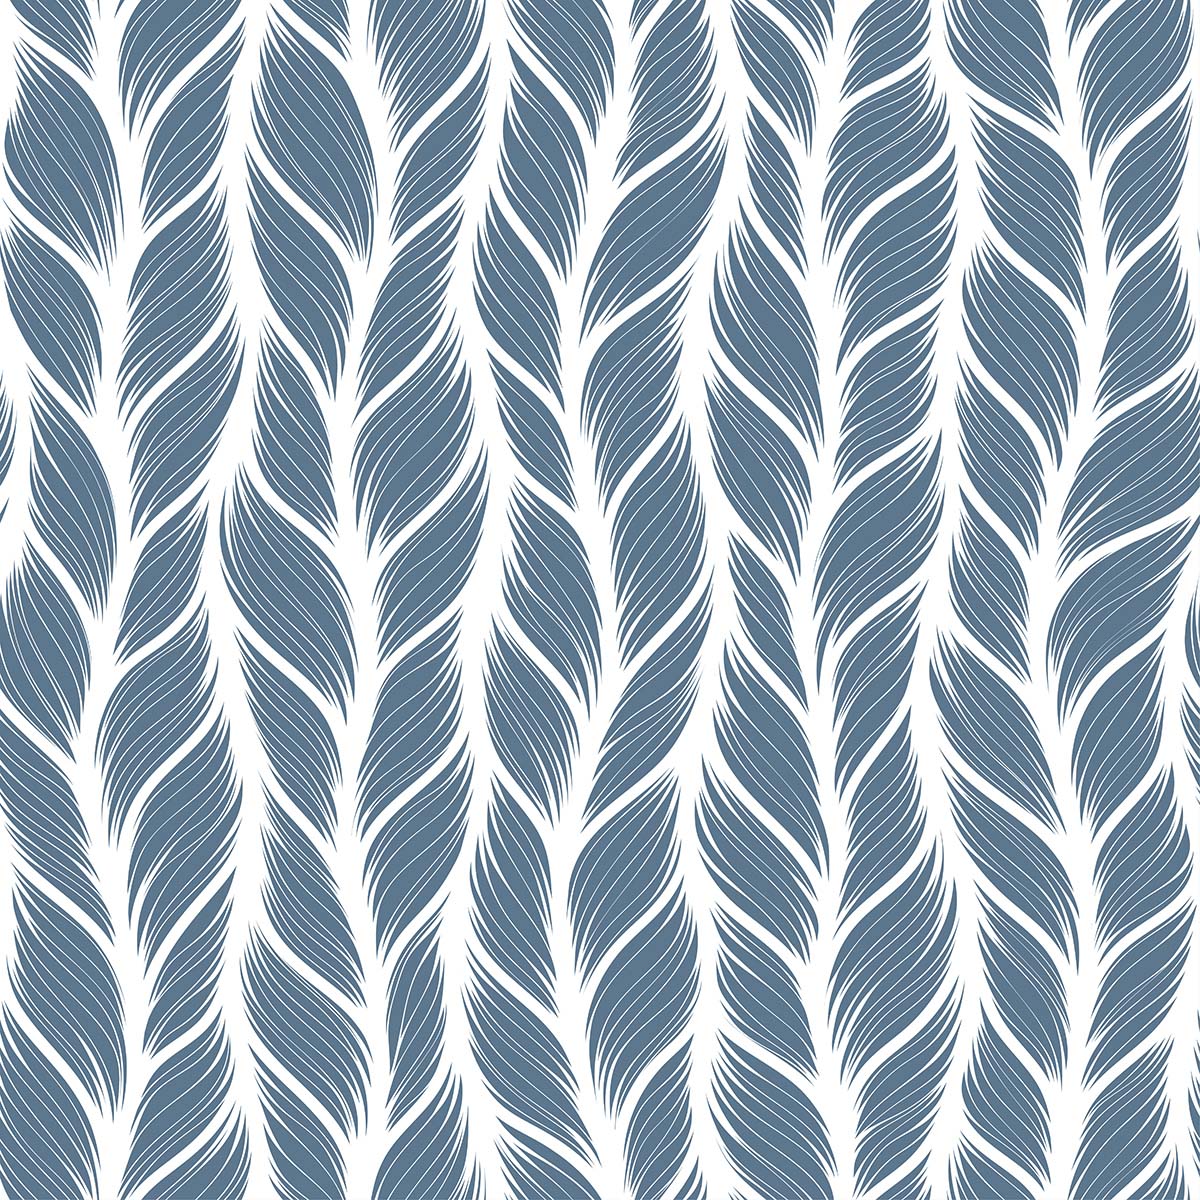 A pattern of blue and white feathers